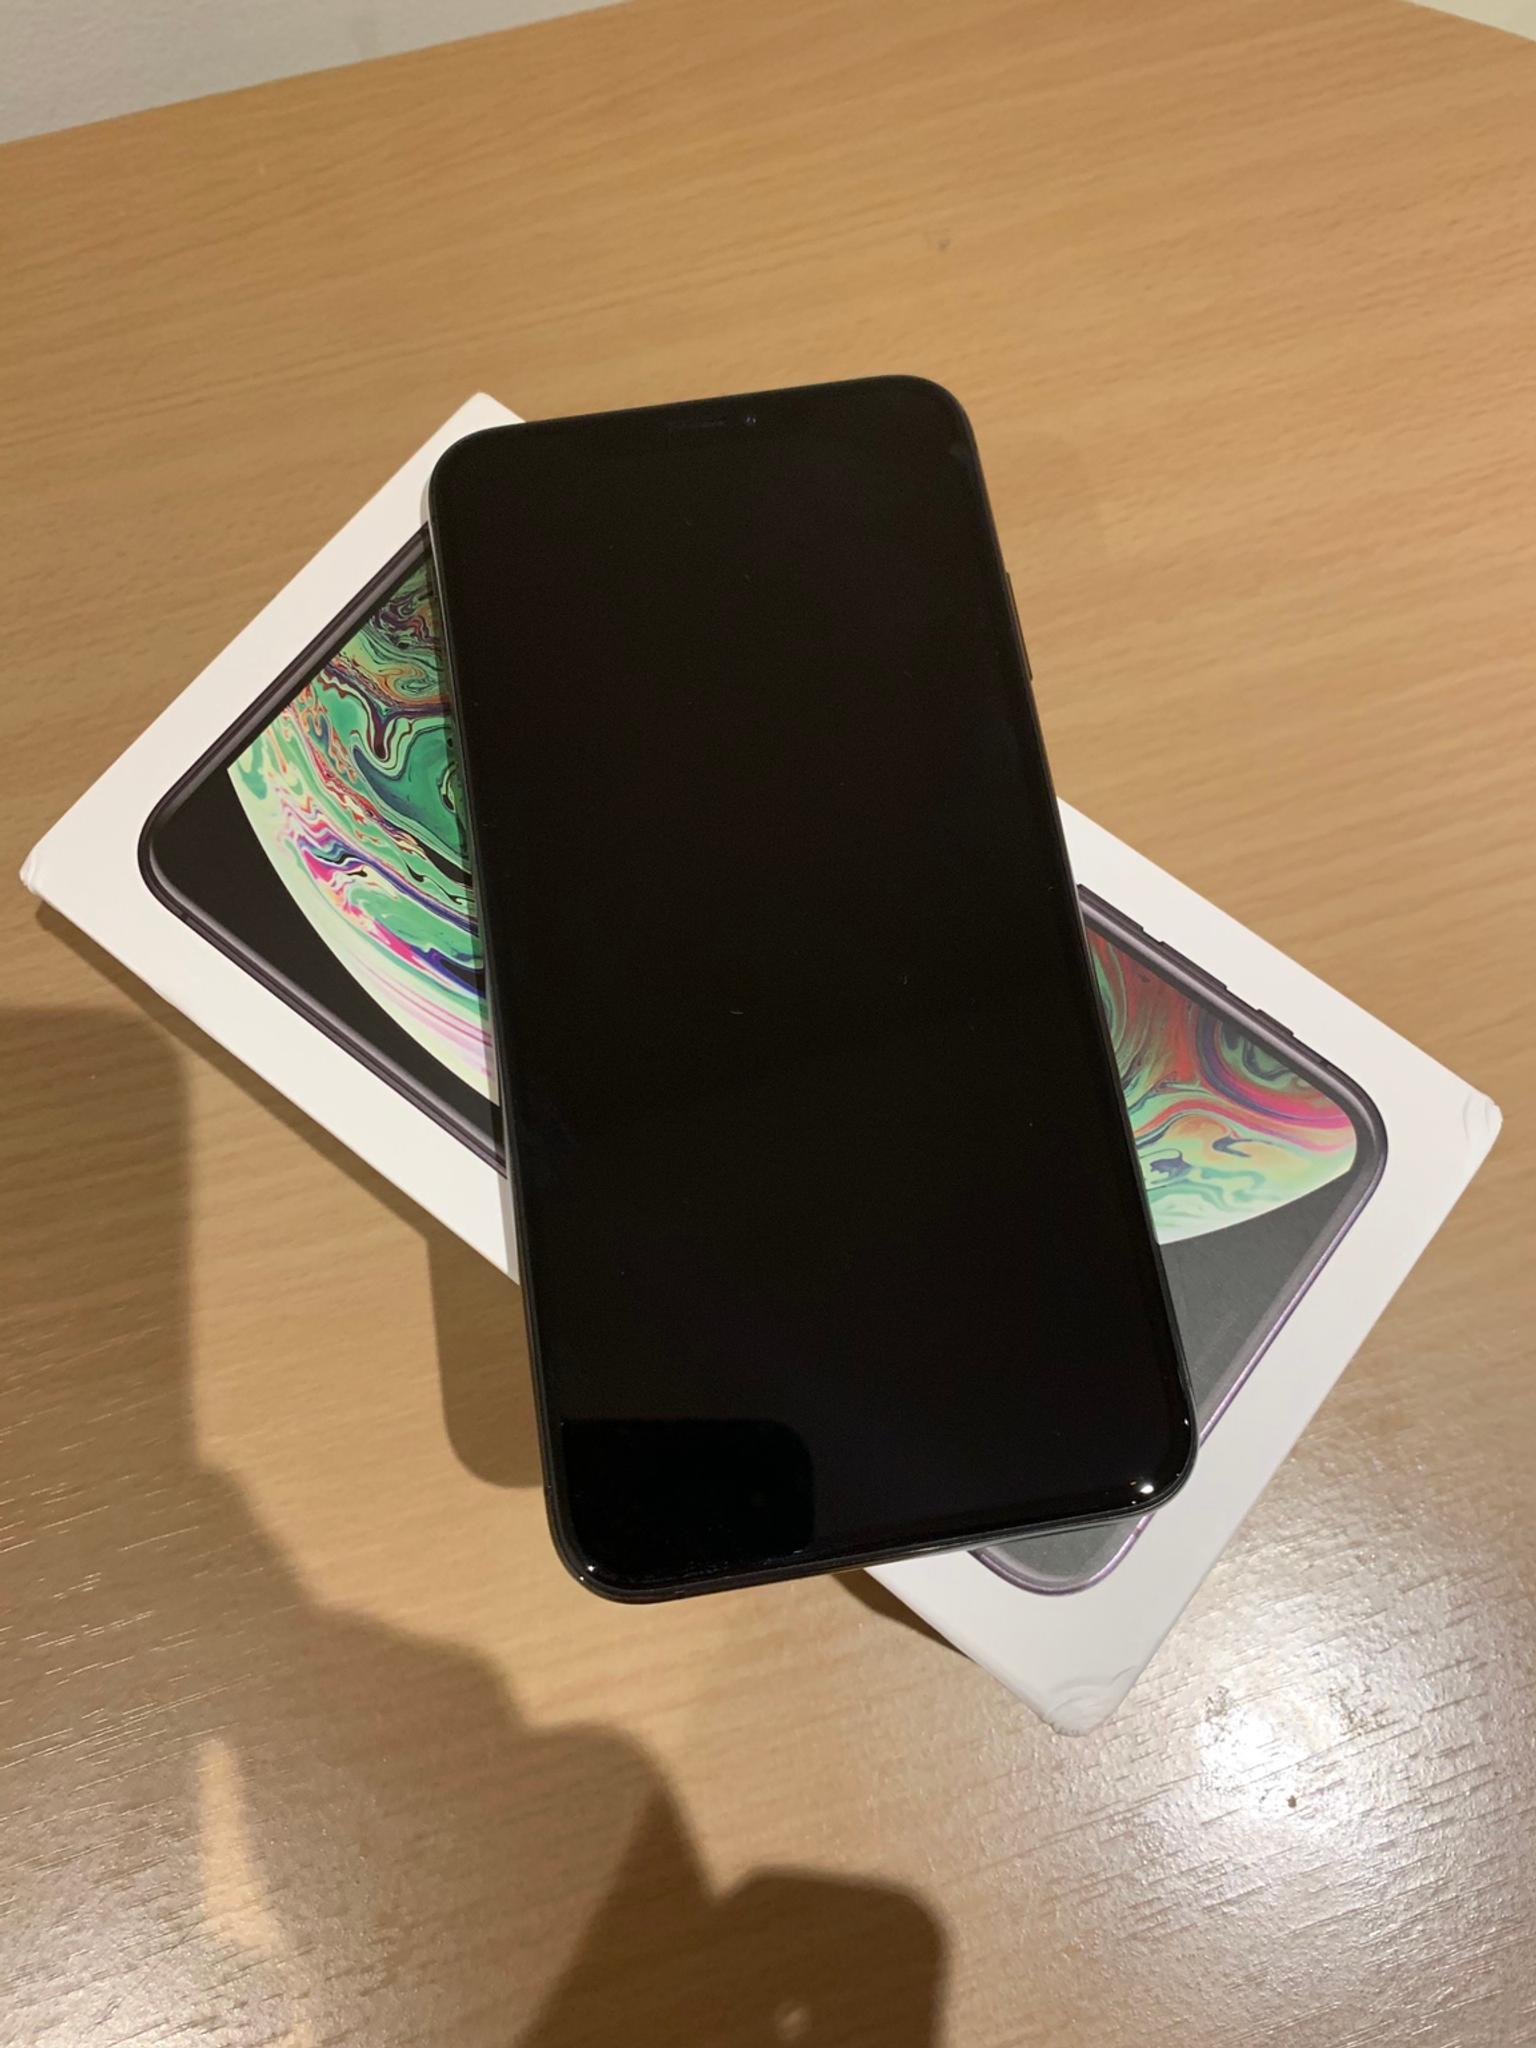 iPhone XS MAX 512GB in SW8 Wandsworth for £1,050.00 for sale | Shpock